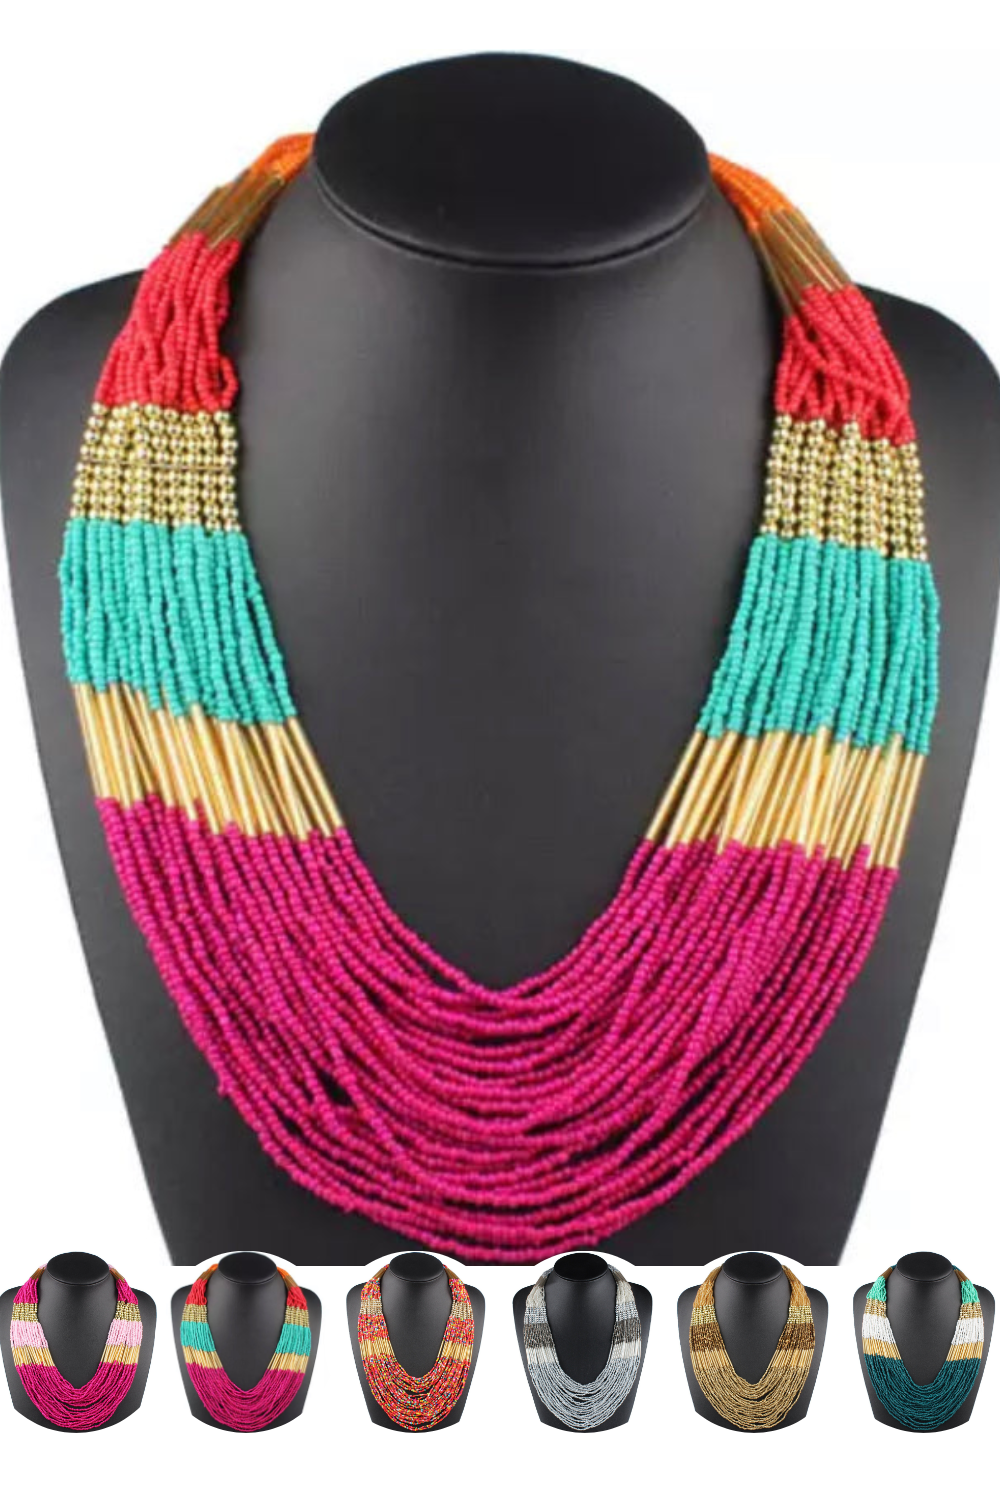 African Bead Maasai Necklace Kendi Amani Handcrafted Full String Beads Bib Necklace African American Heritage Black History Gold Bronze Copper Green Teal Mint Pink Orange Red Grey Silver Brown 